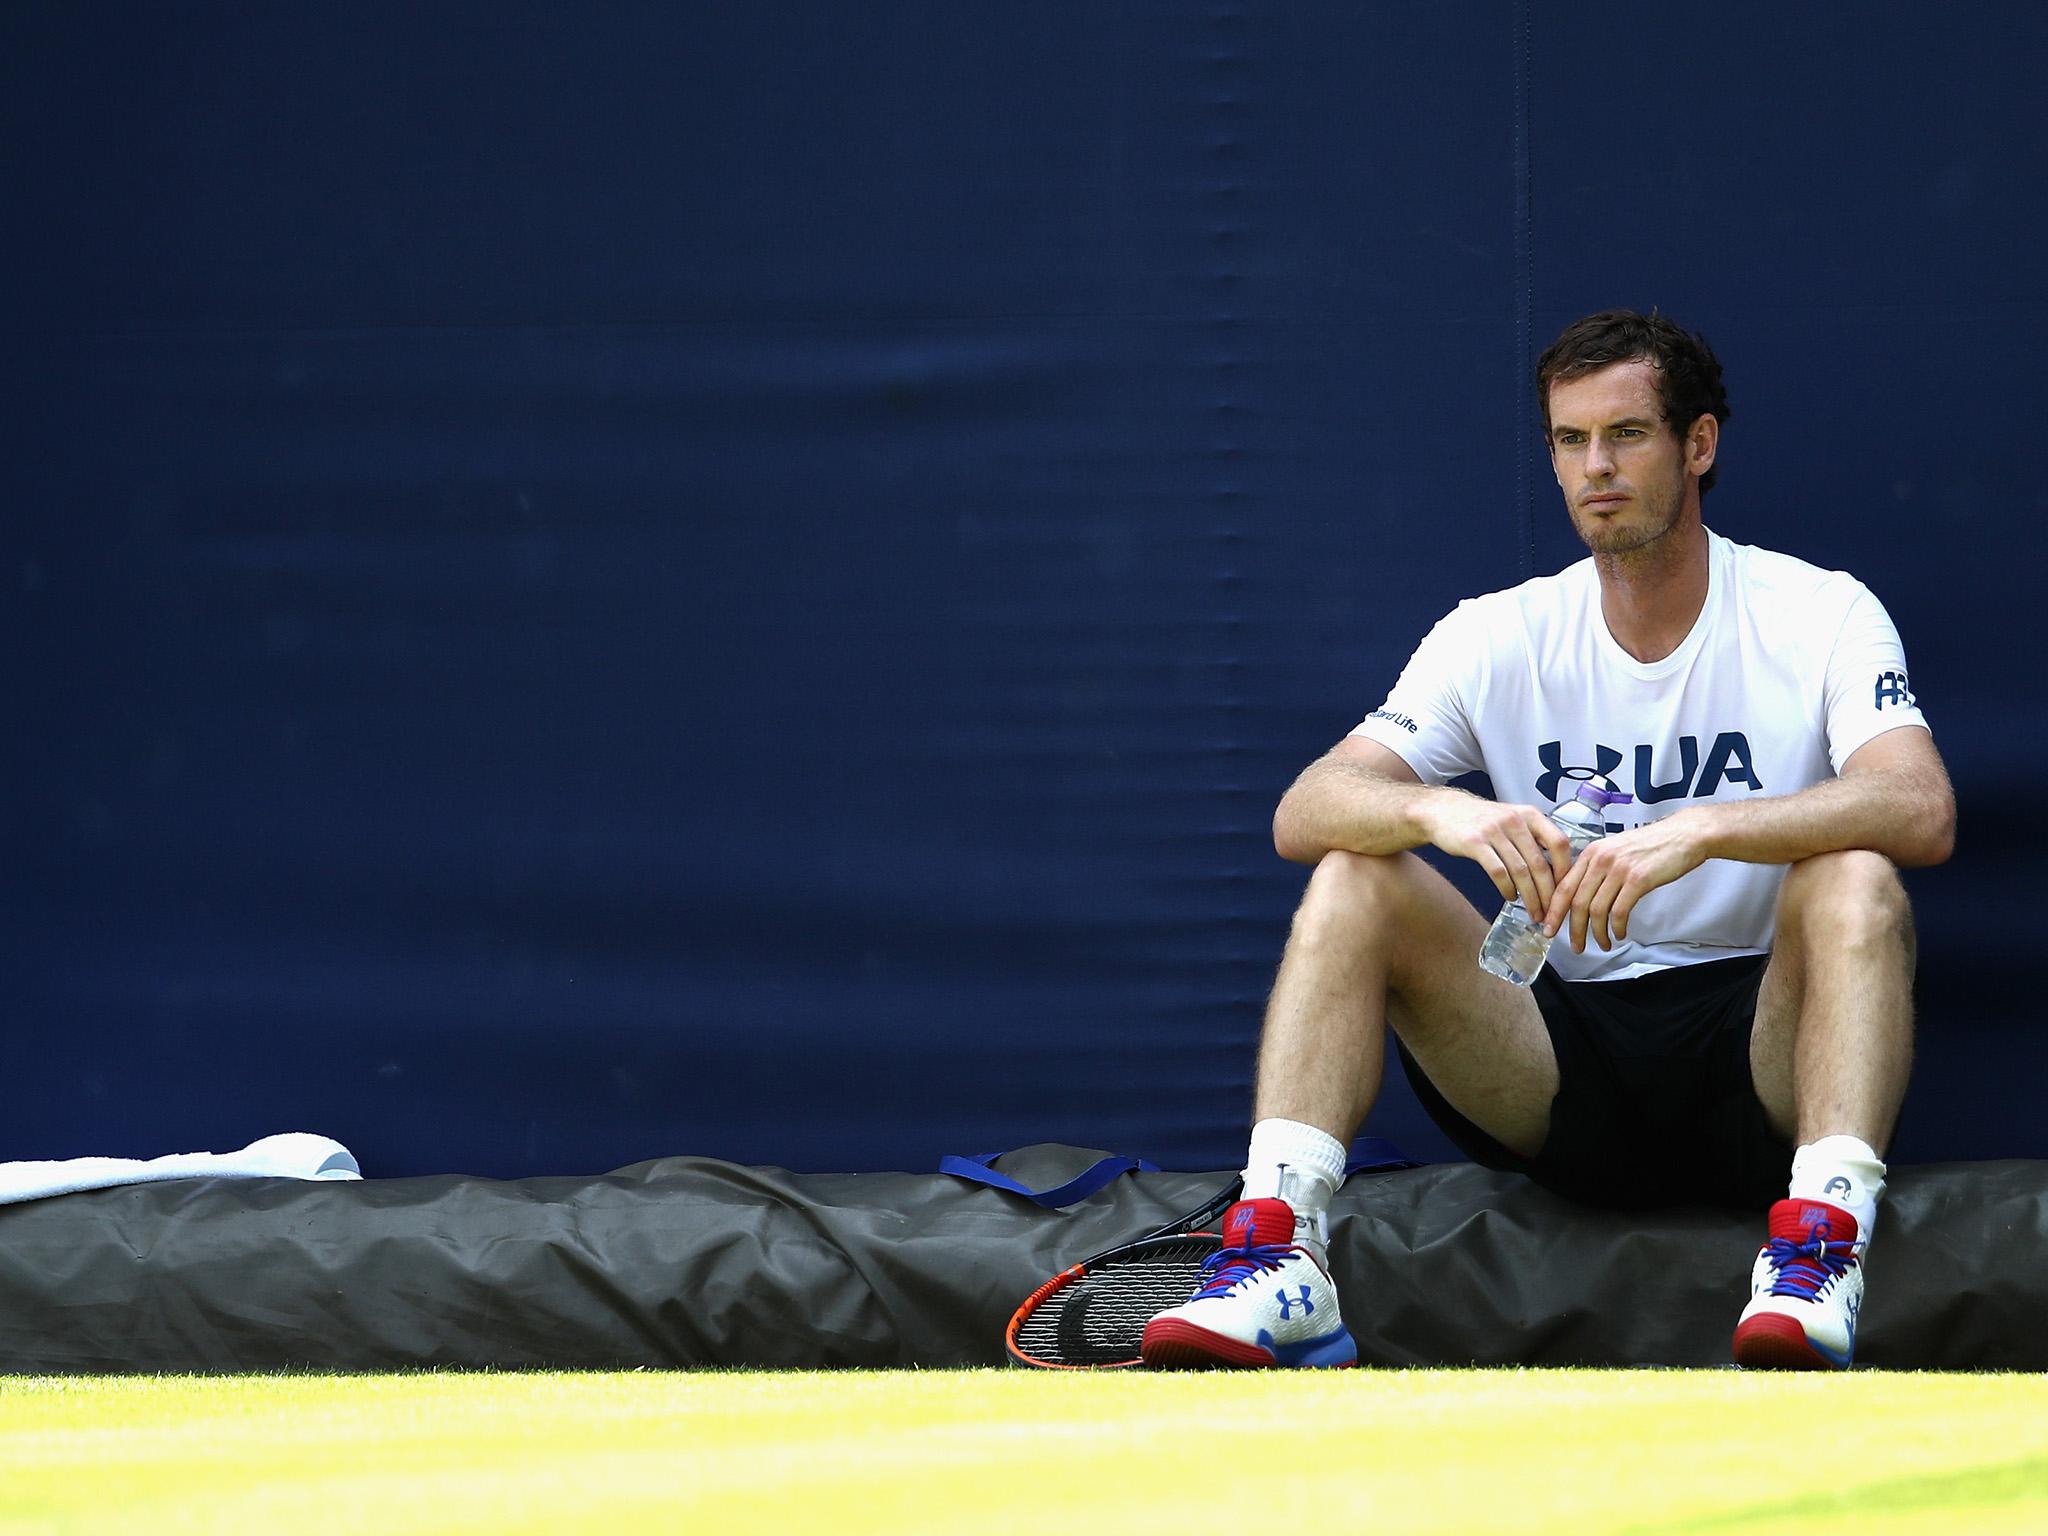 Andy Murray is targeting a return in this year's grass-court season